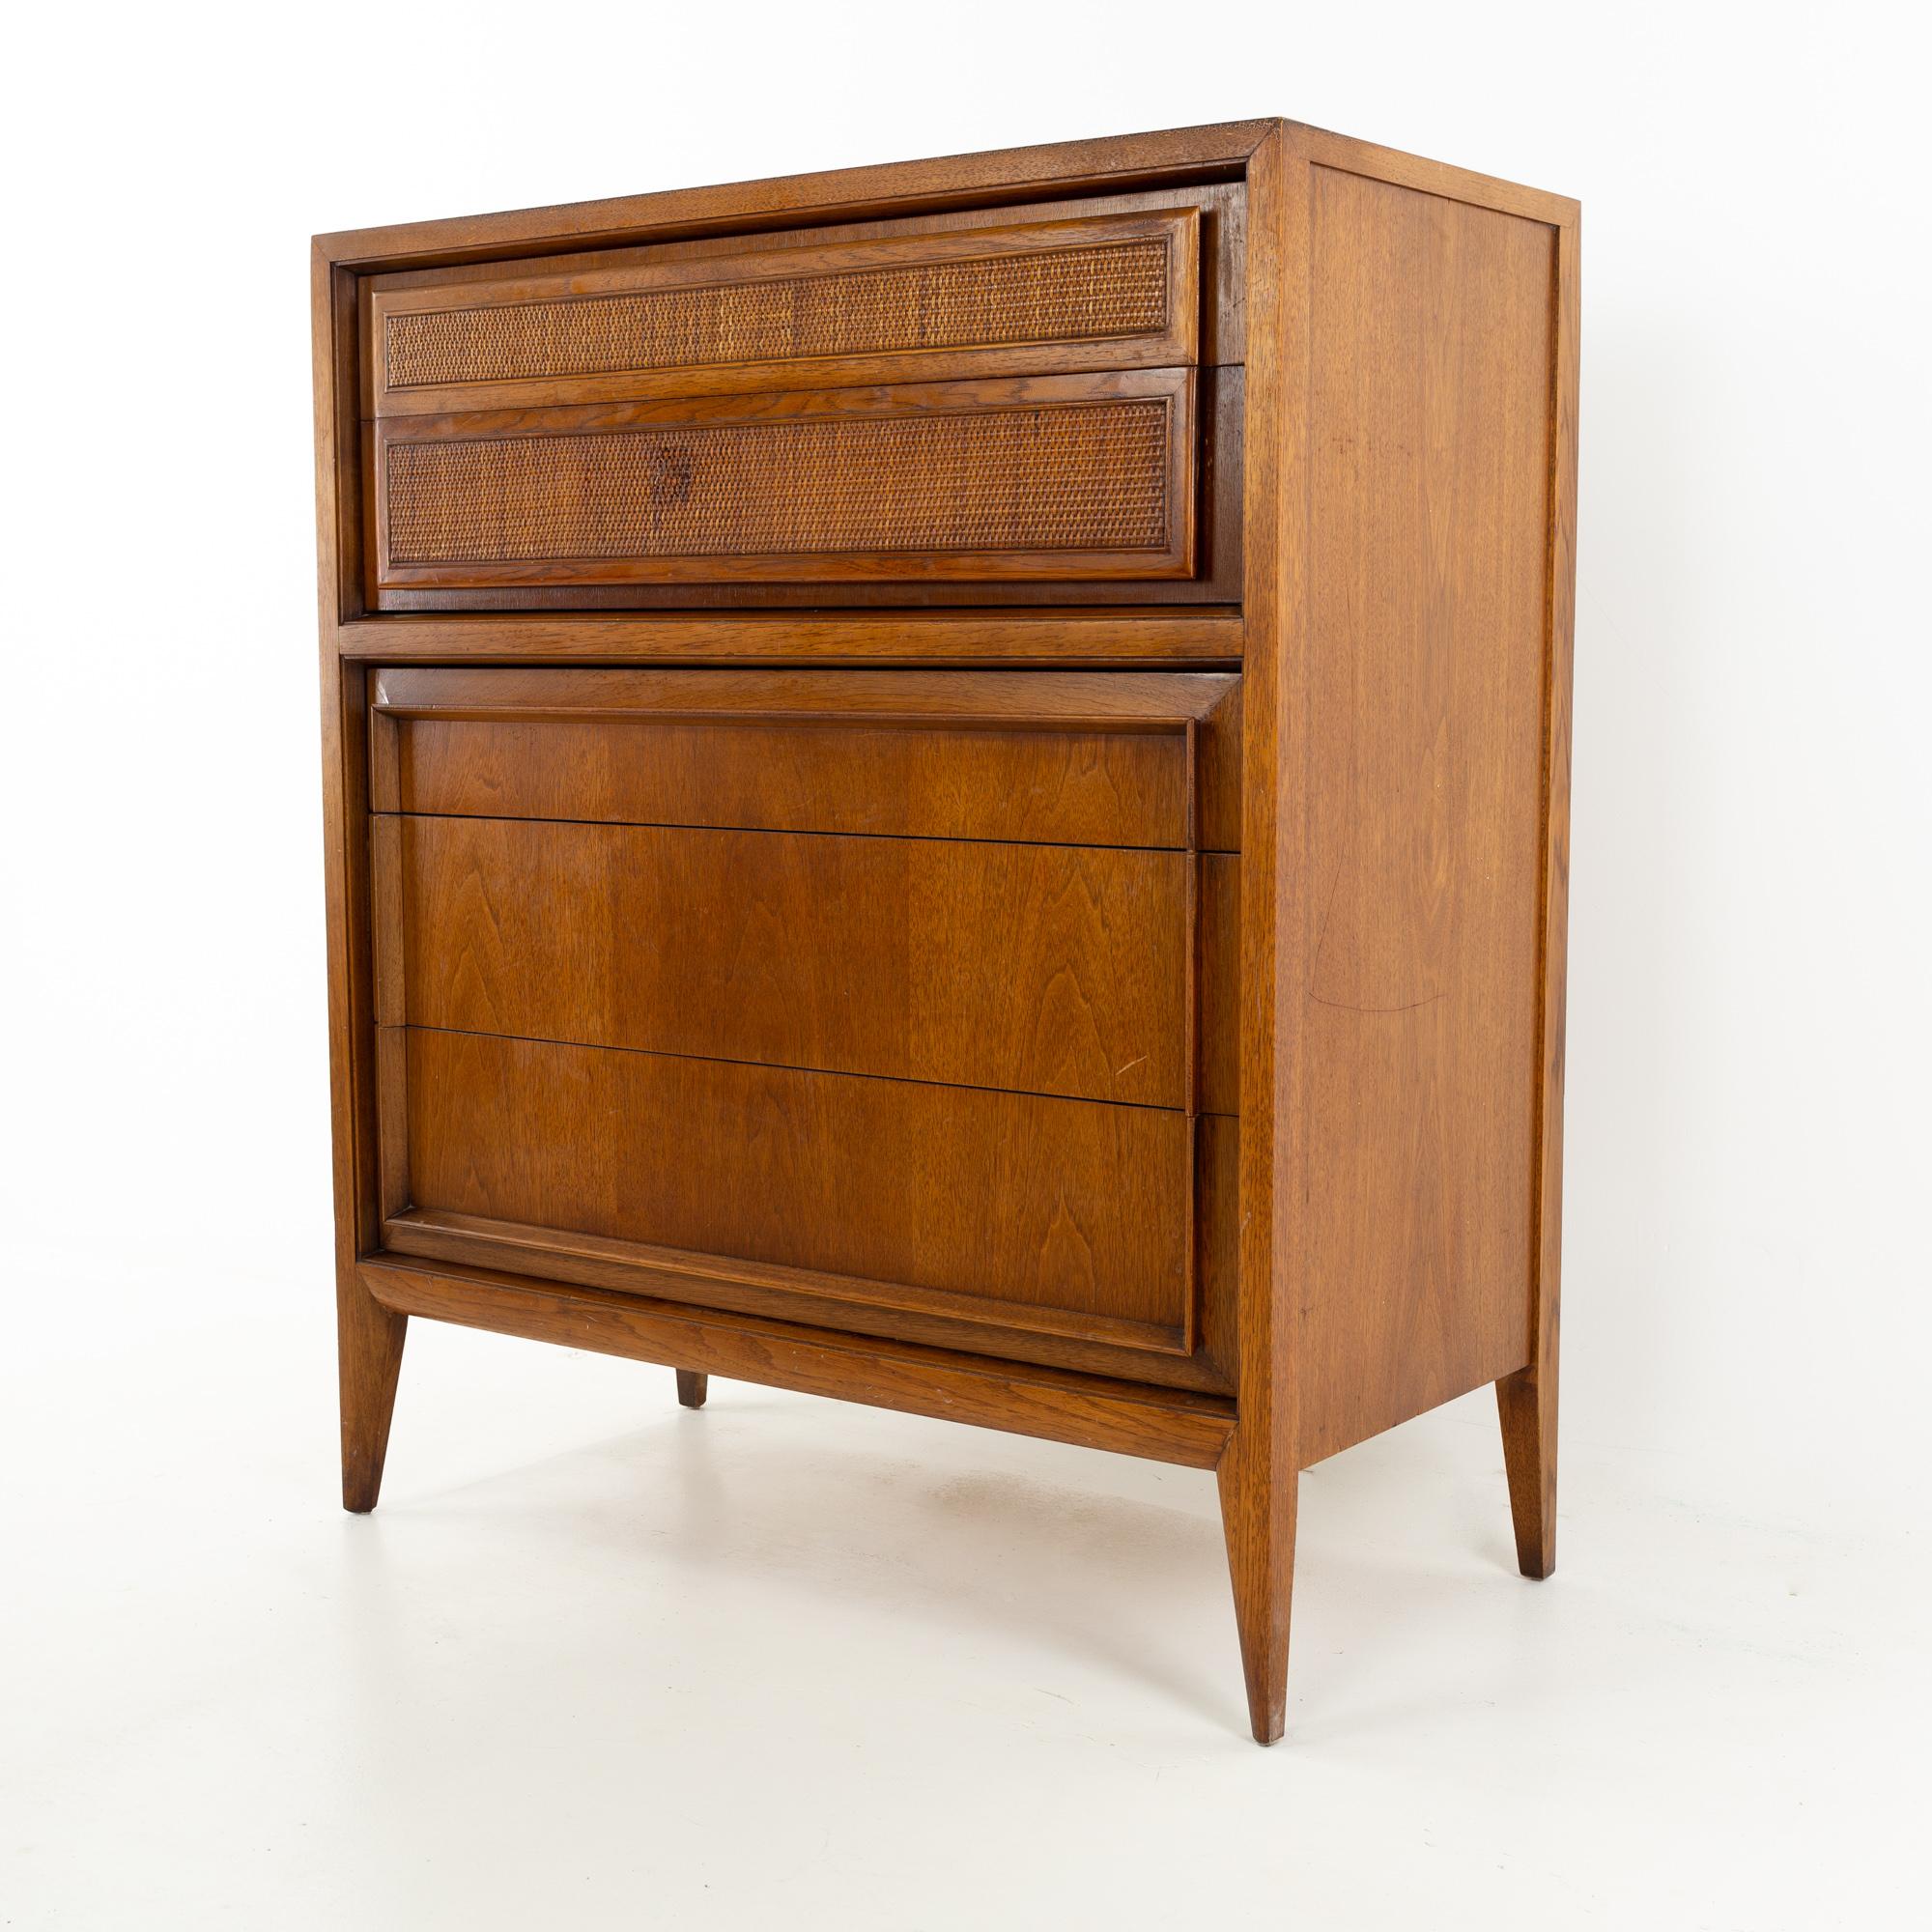 Century mid century walnut and cane 5 drawer highboy dresser
This dresser is 38 wide x 19 deep x 44.5 inches high

All pieces of furniture can be had in what we call restored vintage condition. That means the piece is restored upon purchase so